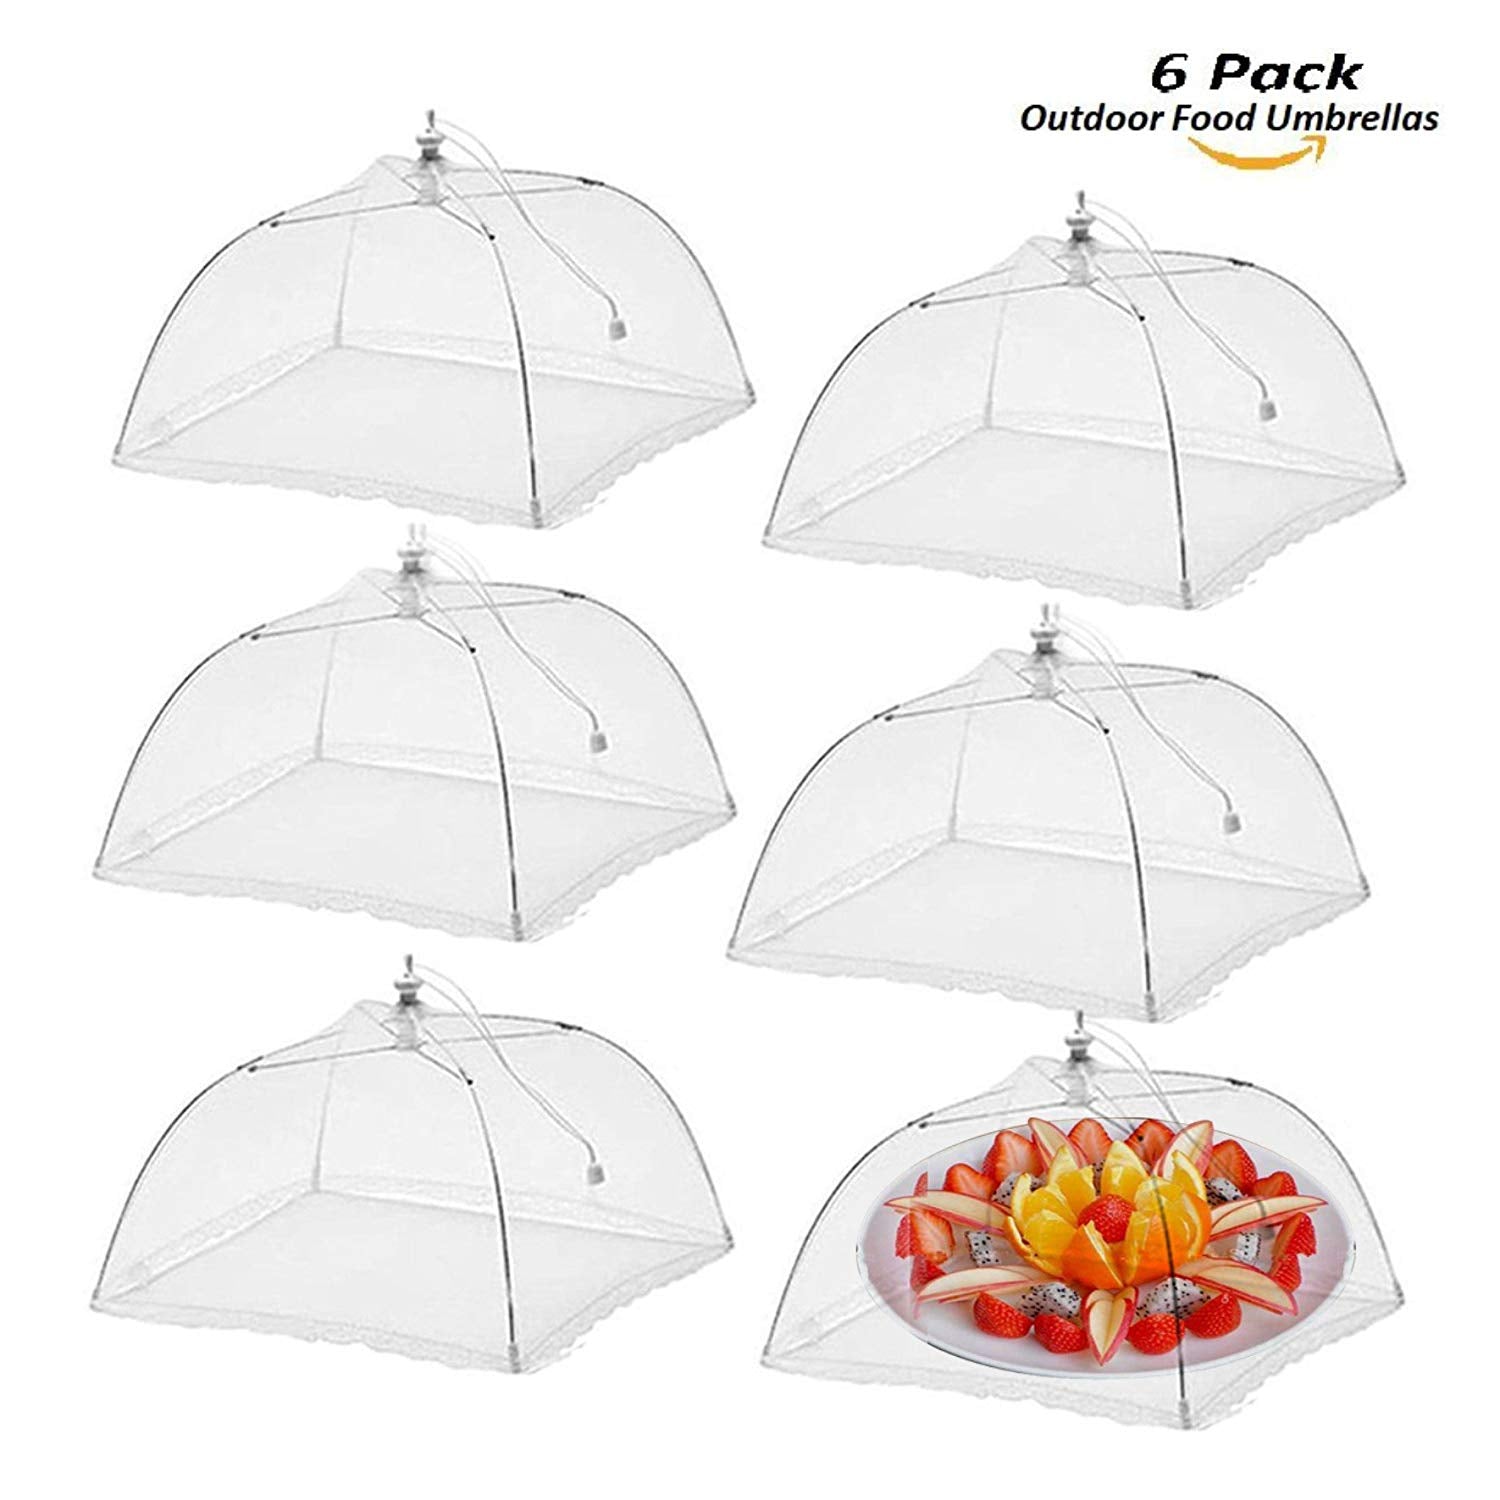 Warmoor Pop-Up Mesh Screen, Food Cover Tent Umbrella Screens, Reusable Collapsible Outdoor Picnic Food Covers Mesh Net, Keep Out Flies, Bugs, Mosquitoes, 6 Pack (White)